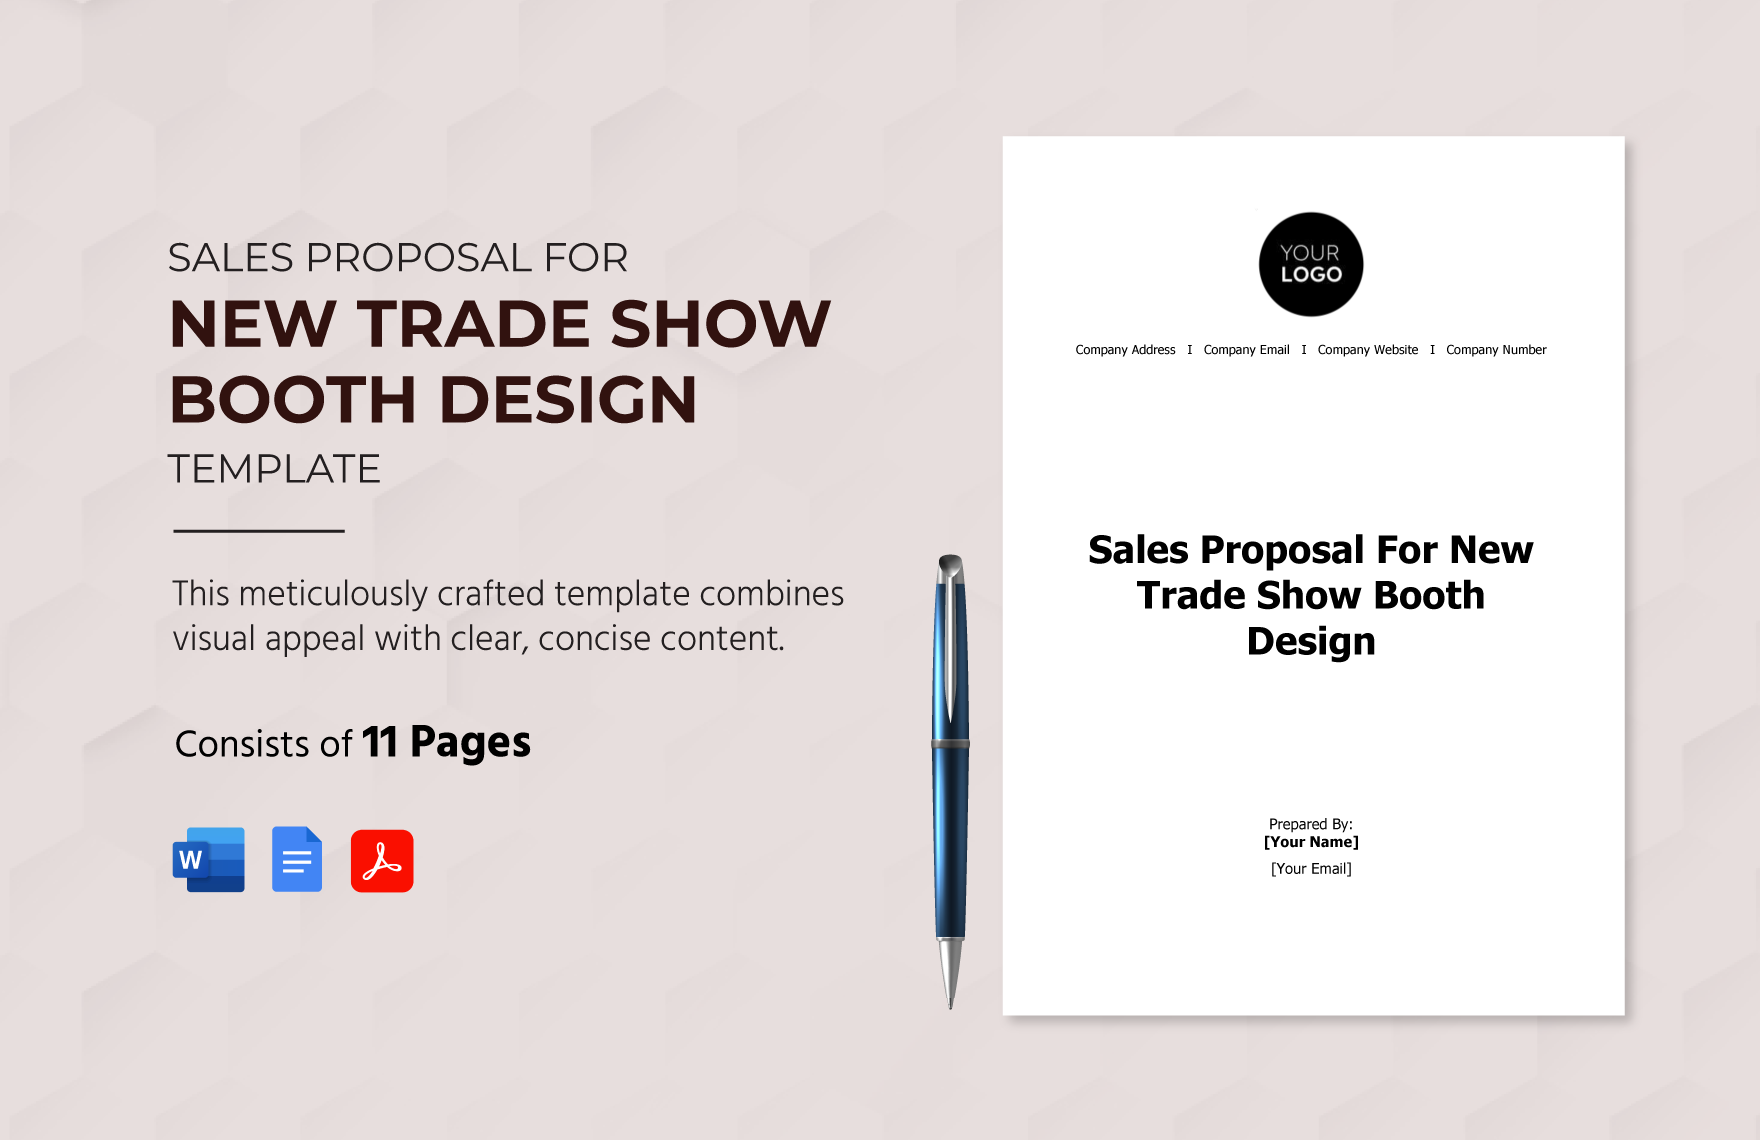 Sales Proposal for New Trade Show Booth Design Template